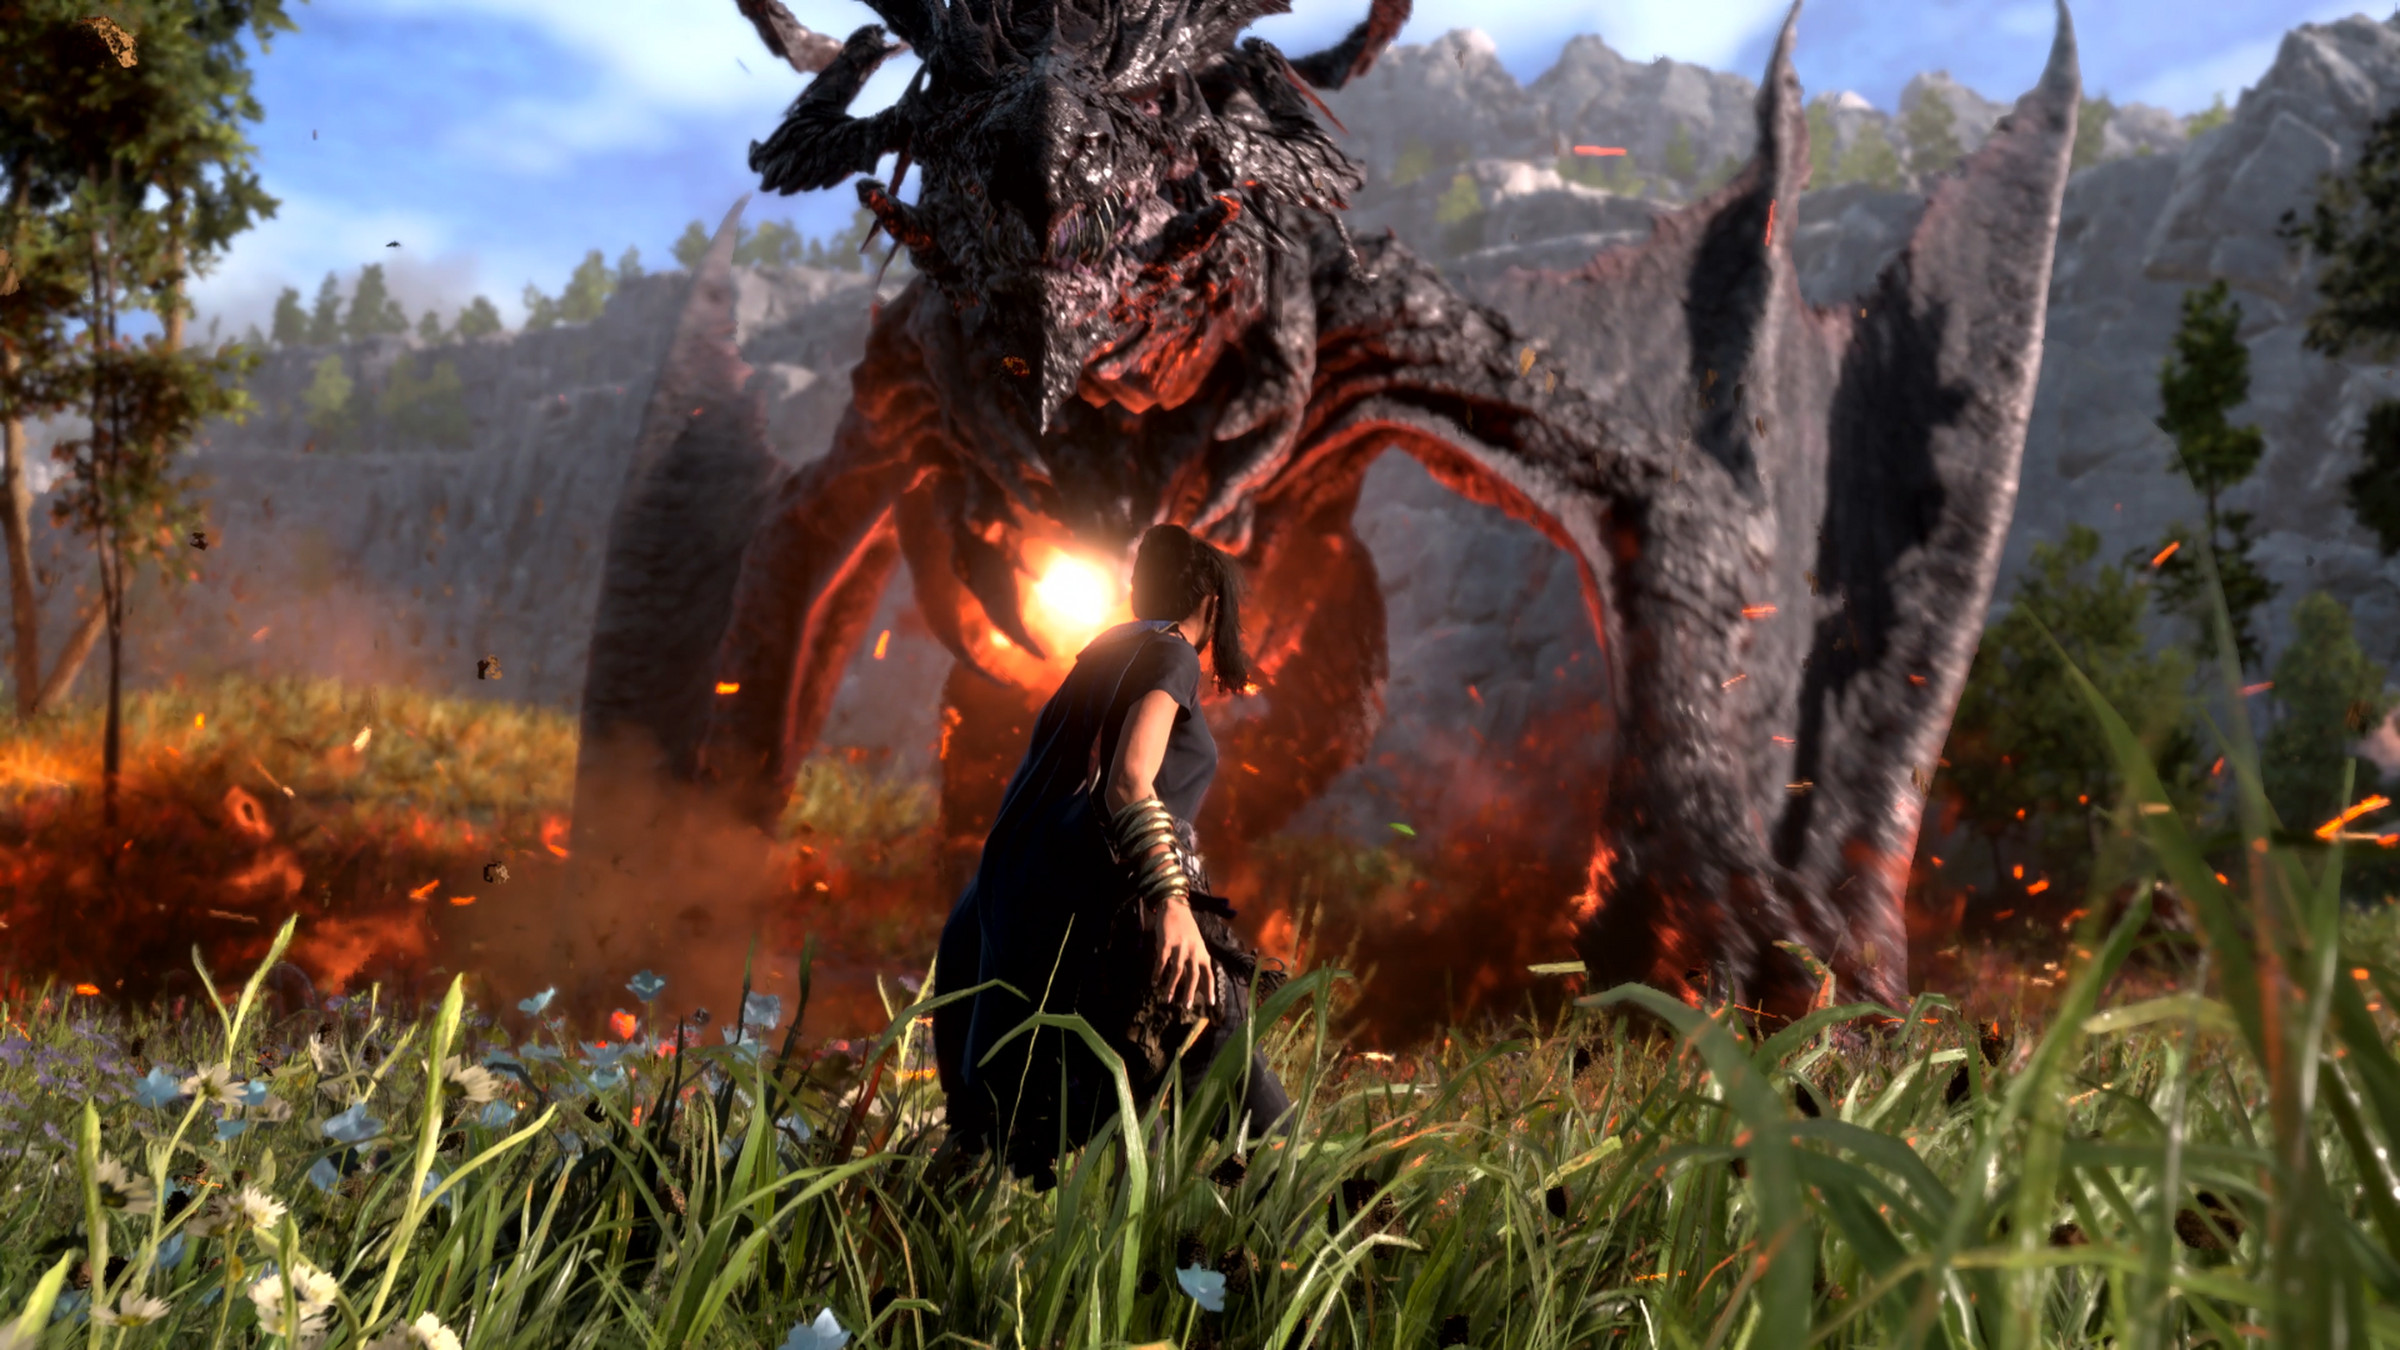 Screenshot from Forspoken featuring Frey facing down a menacing dragon in a grassy field